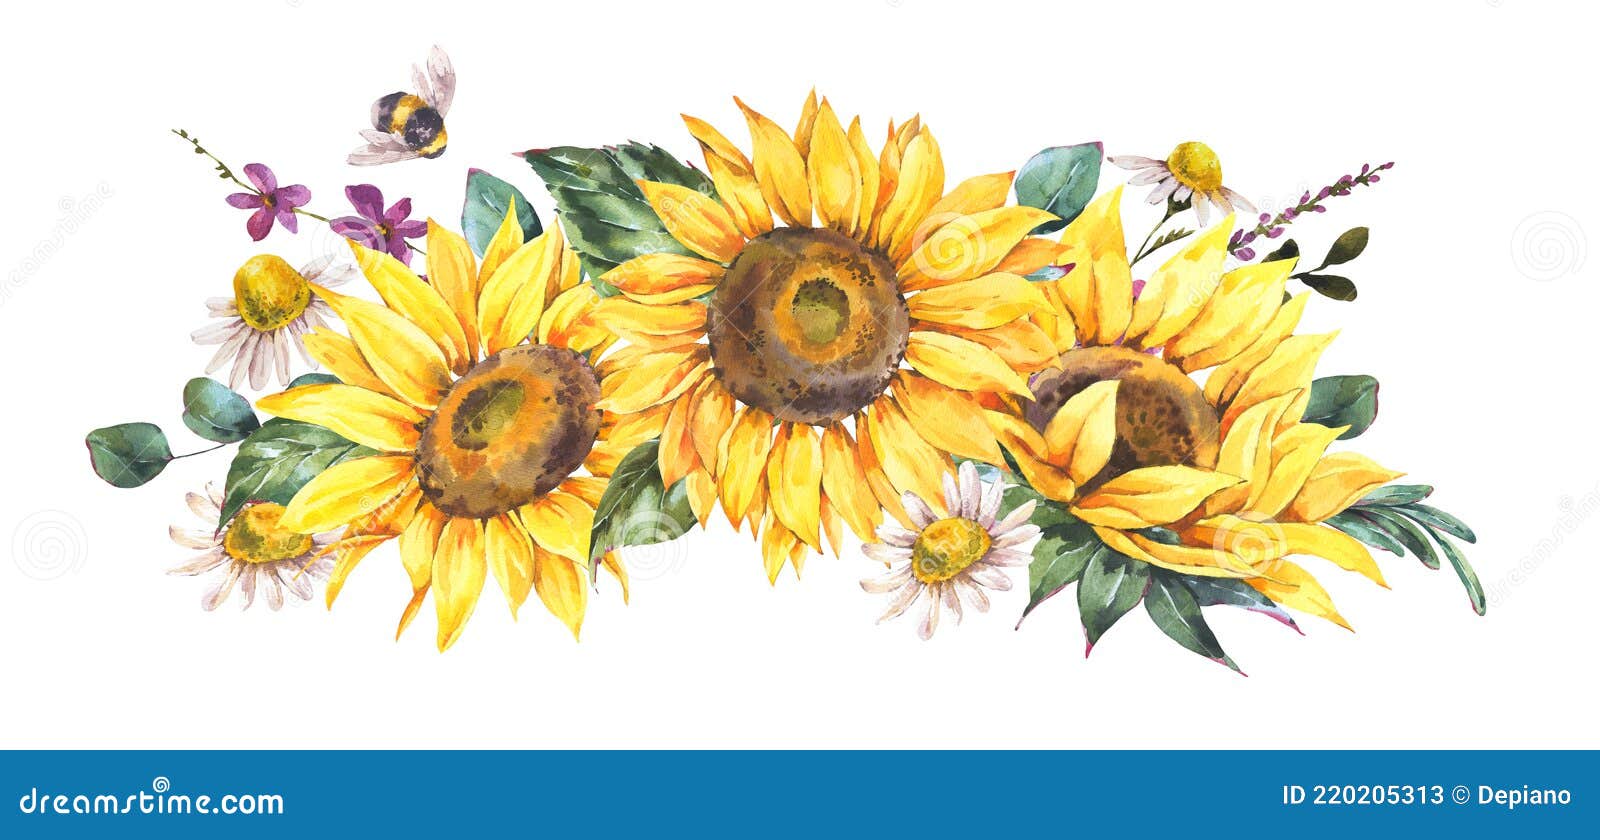 watercolor sunflowers summer vintage wreath. natural yellow floral greeting card